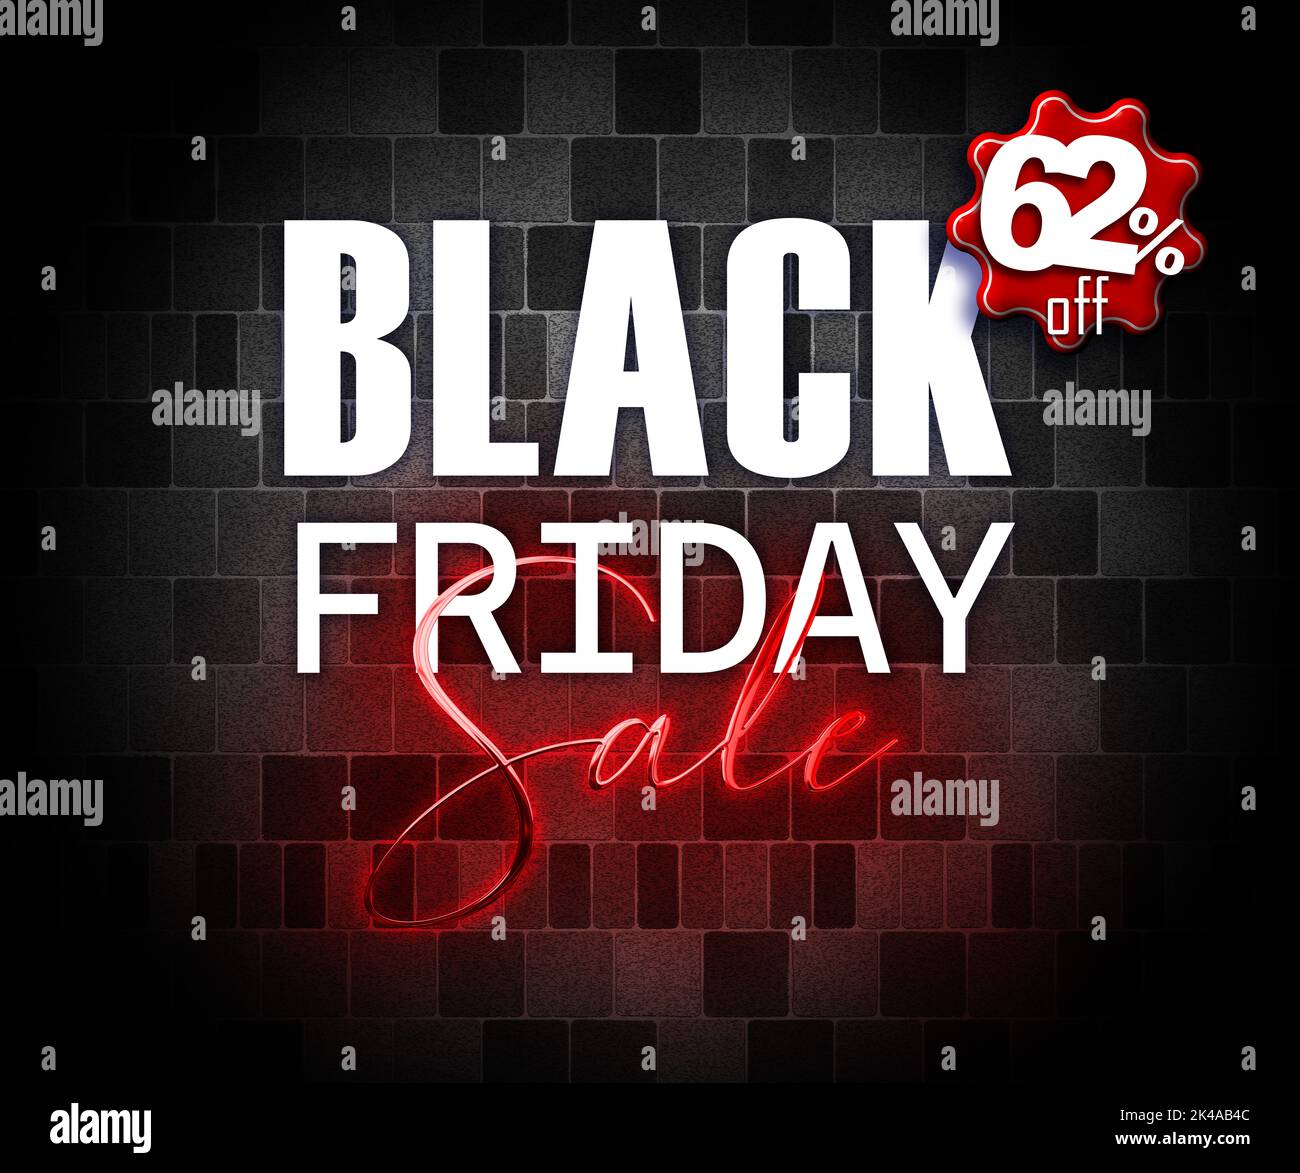 illustration with 3d elements black friday promotion banner 62 percent off sales increase Stock Photo